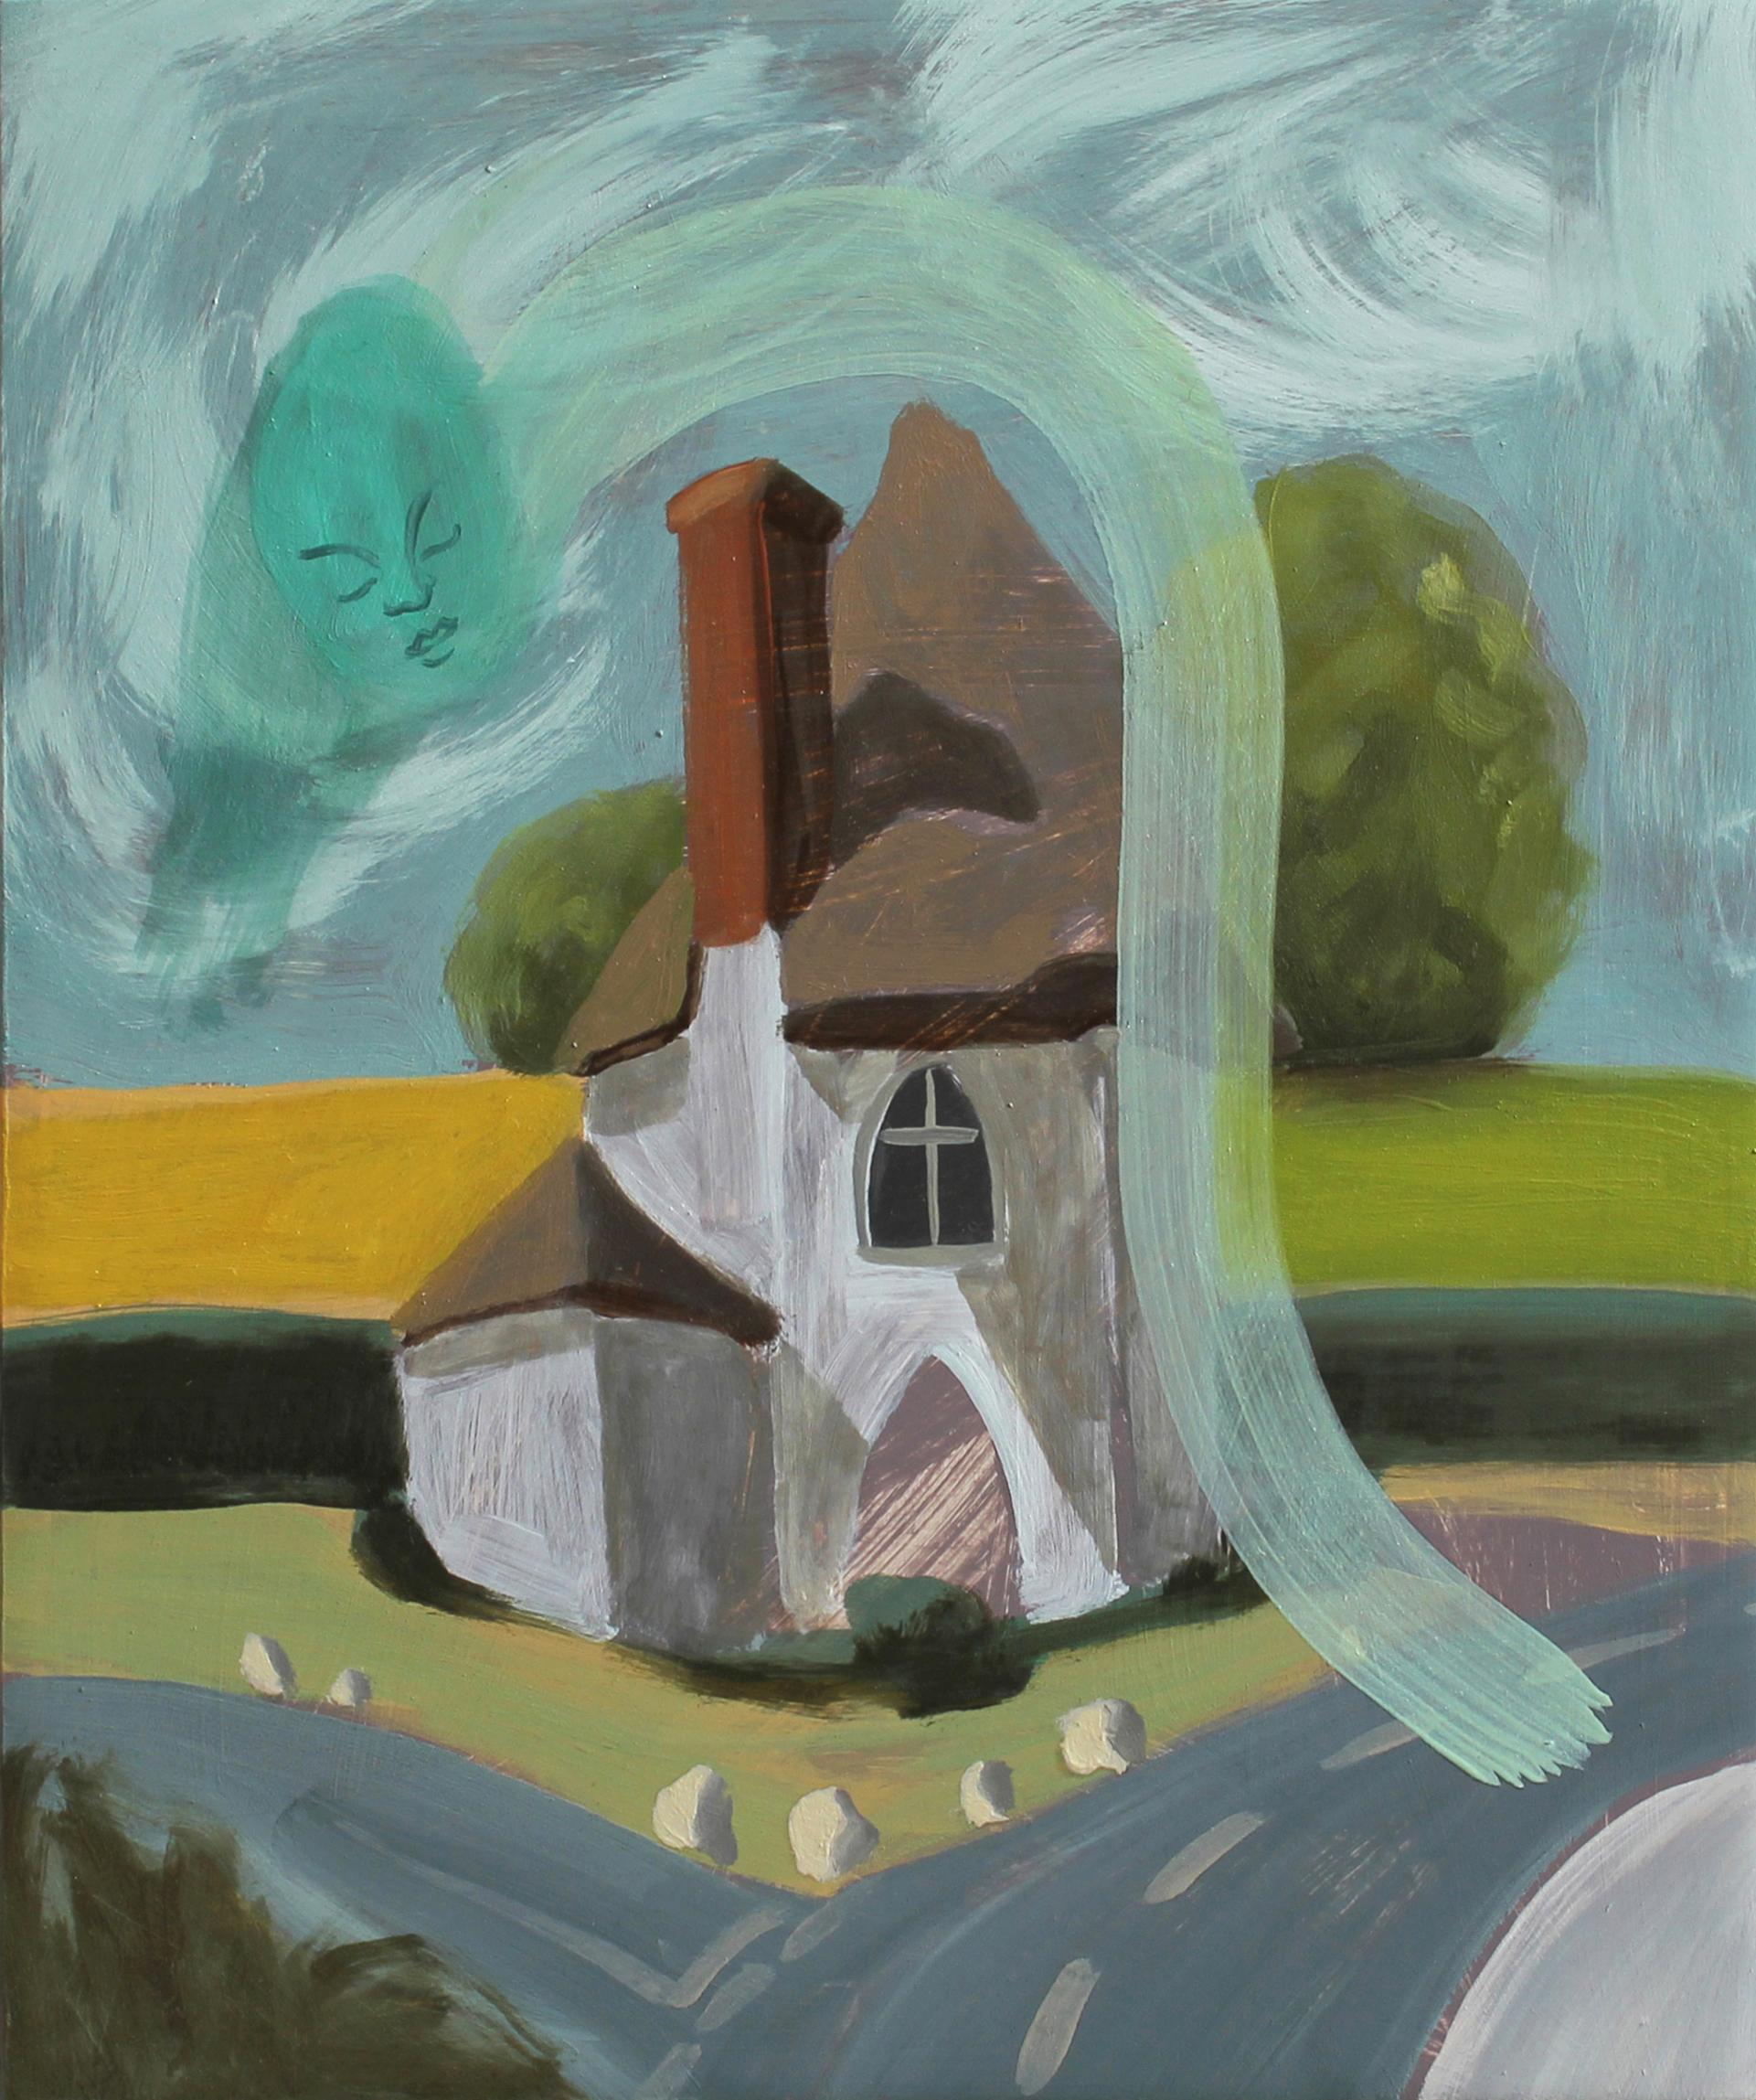 'Cottage 15', 30x25cm, oil and acrylic on linen on limewood, 2021